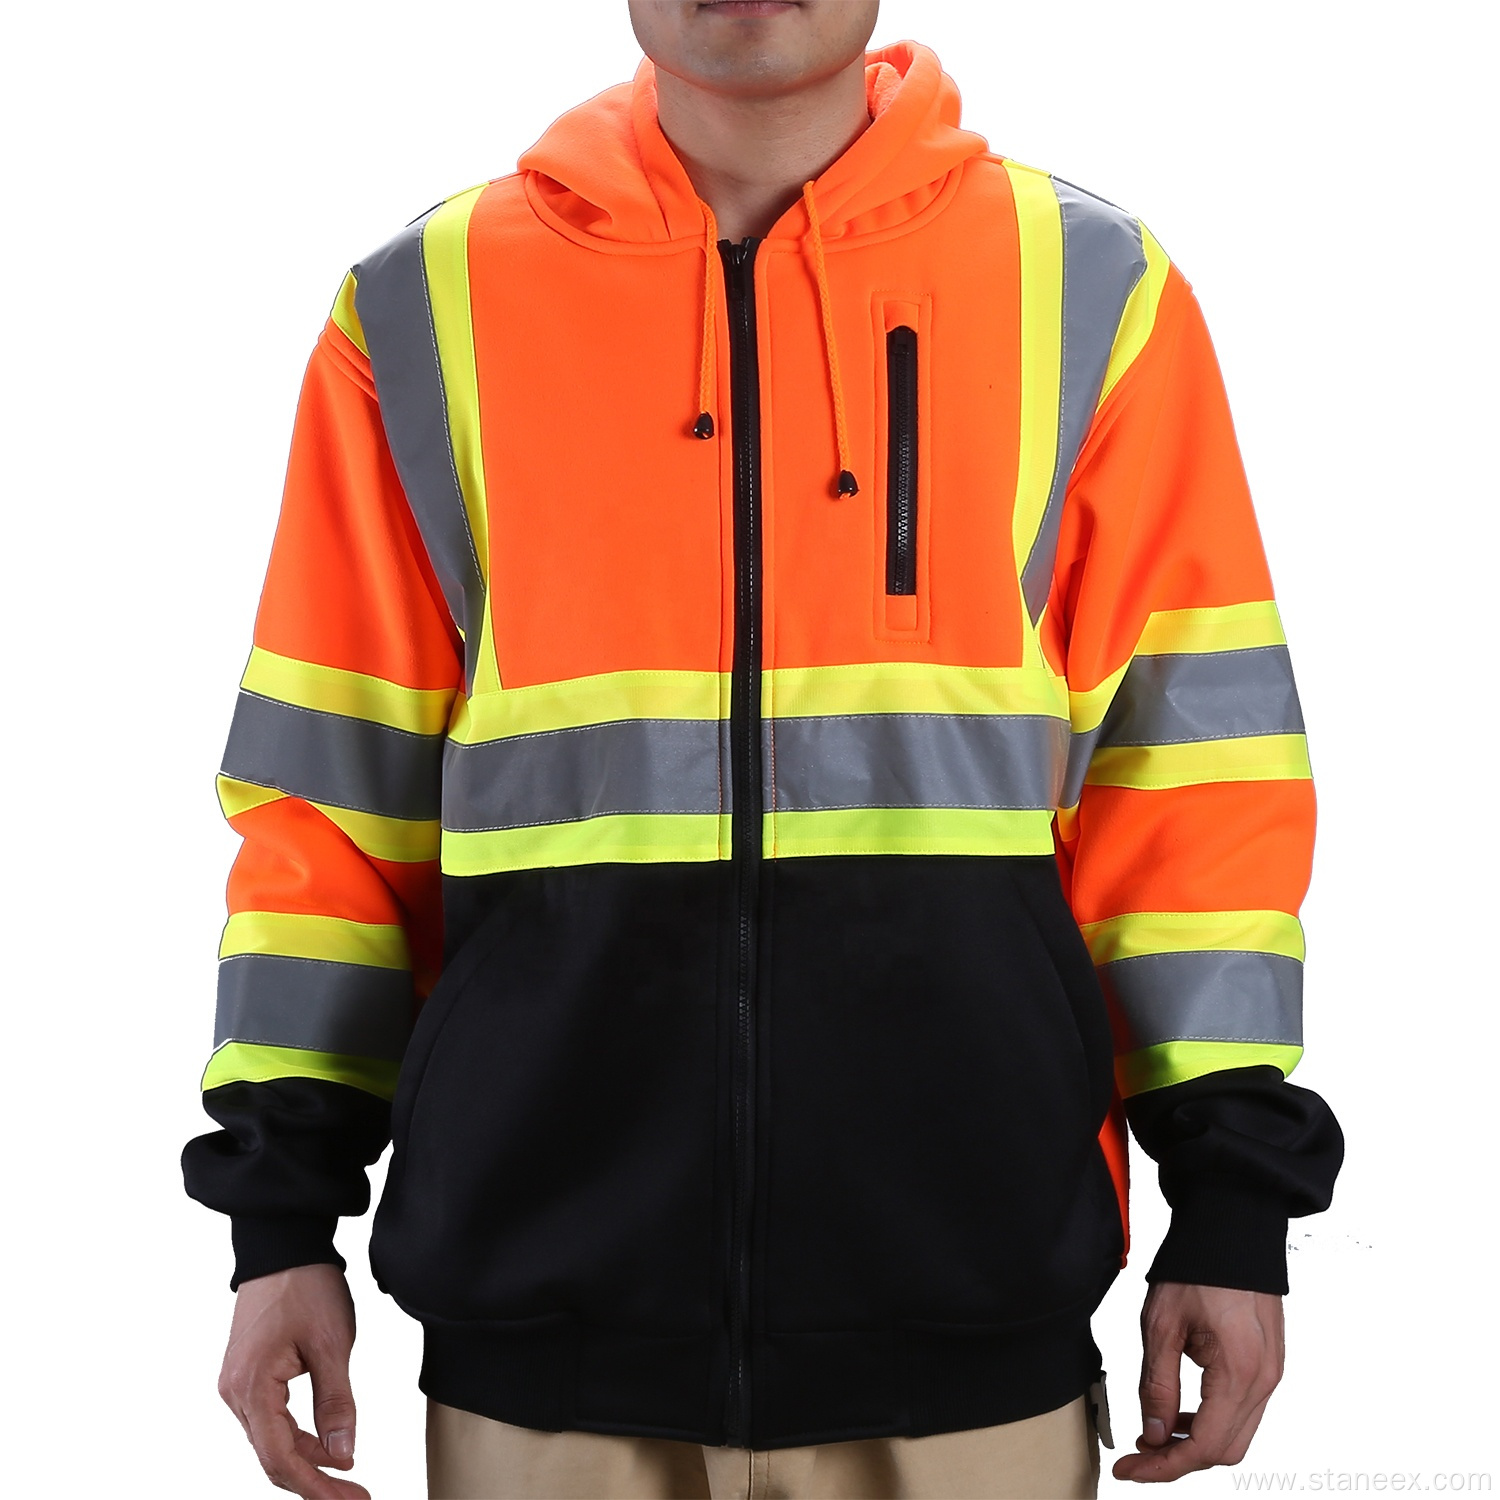 High Vis Sweater Security Hoodies Reflective Safety Jacket